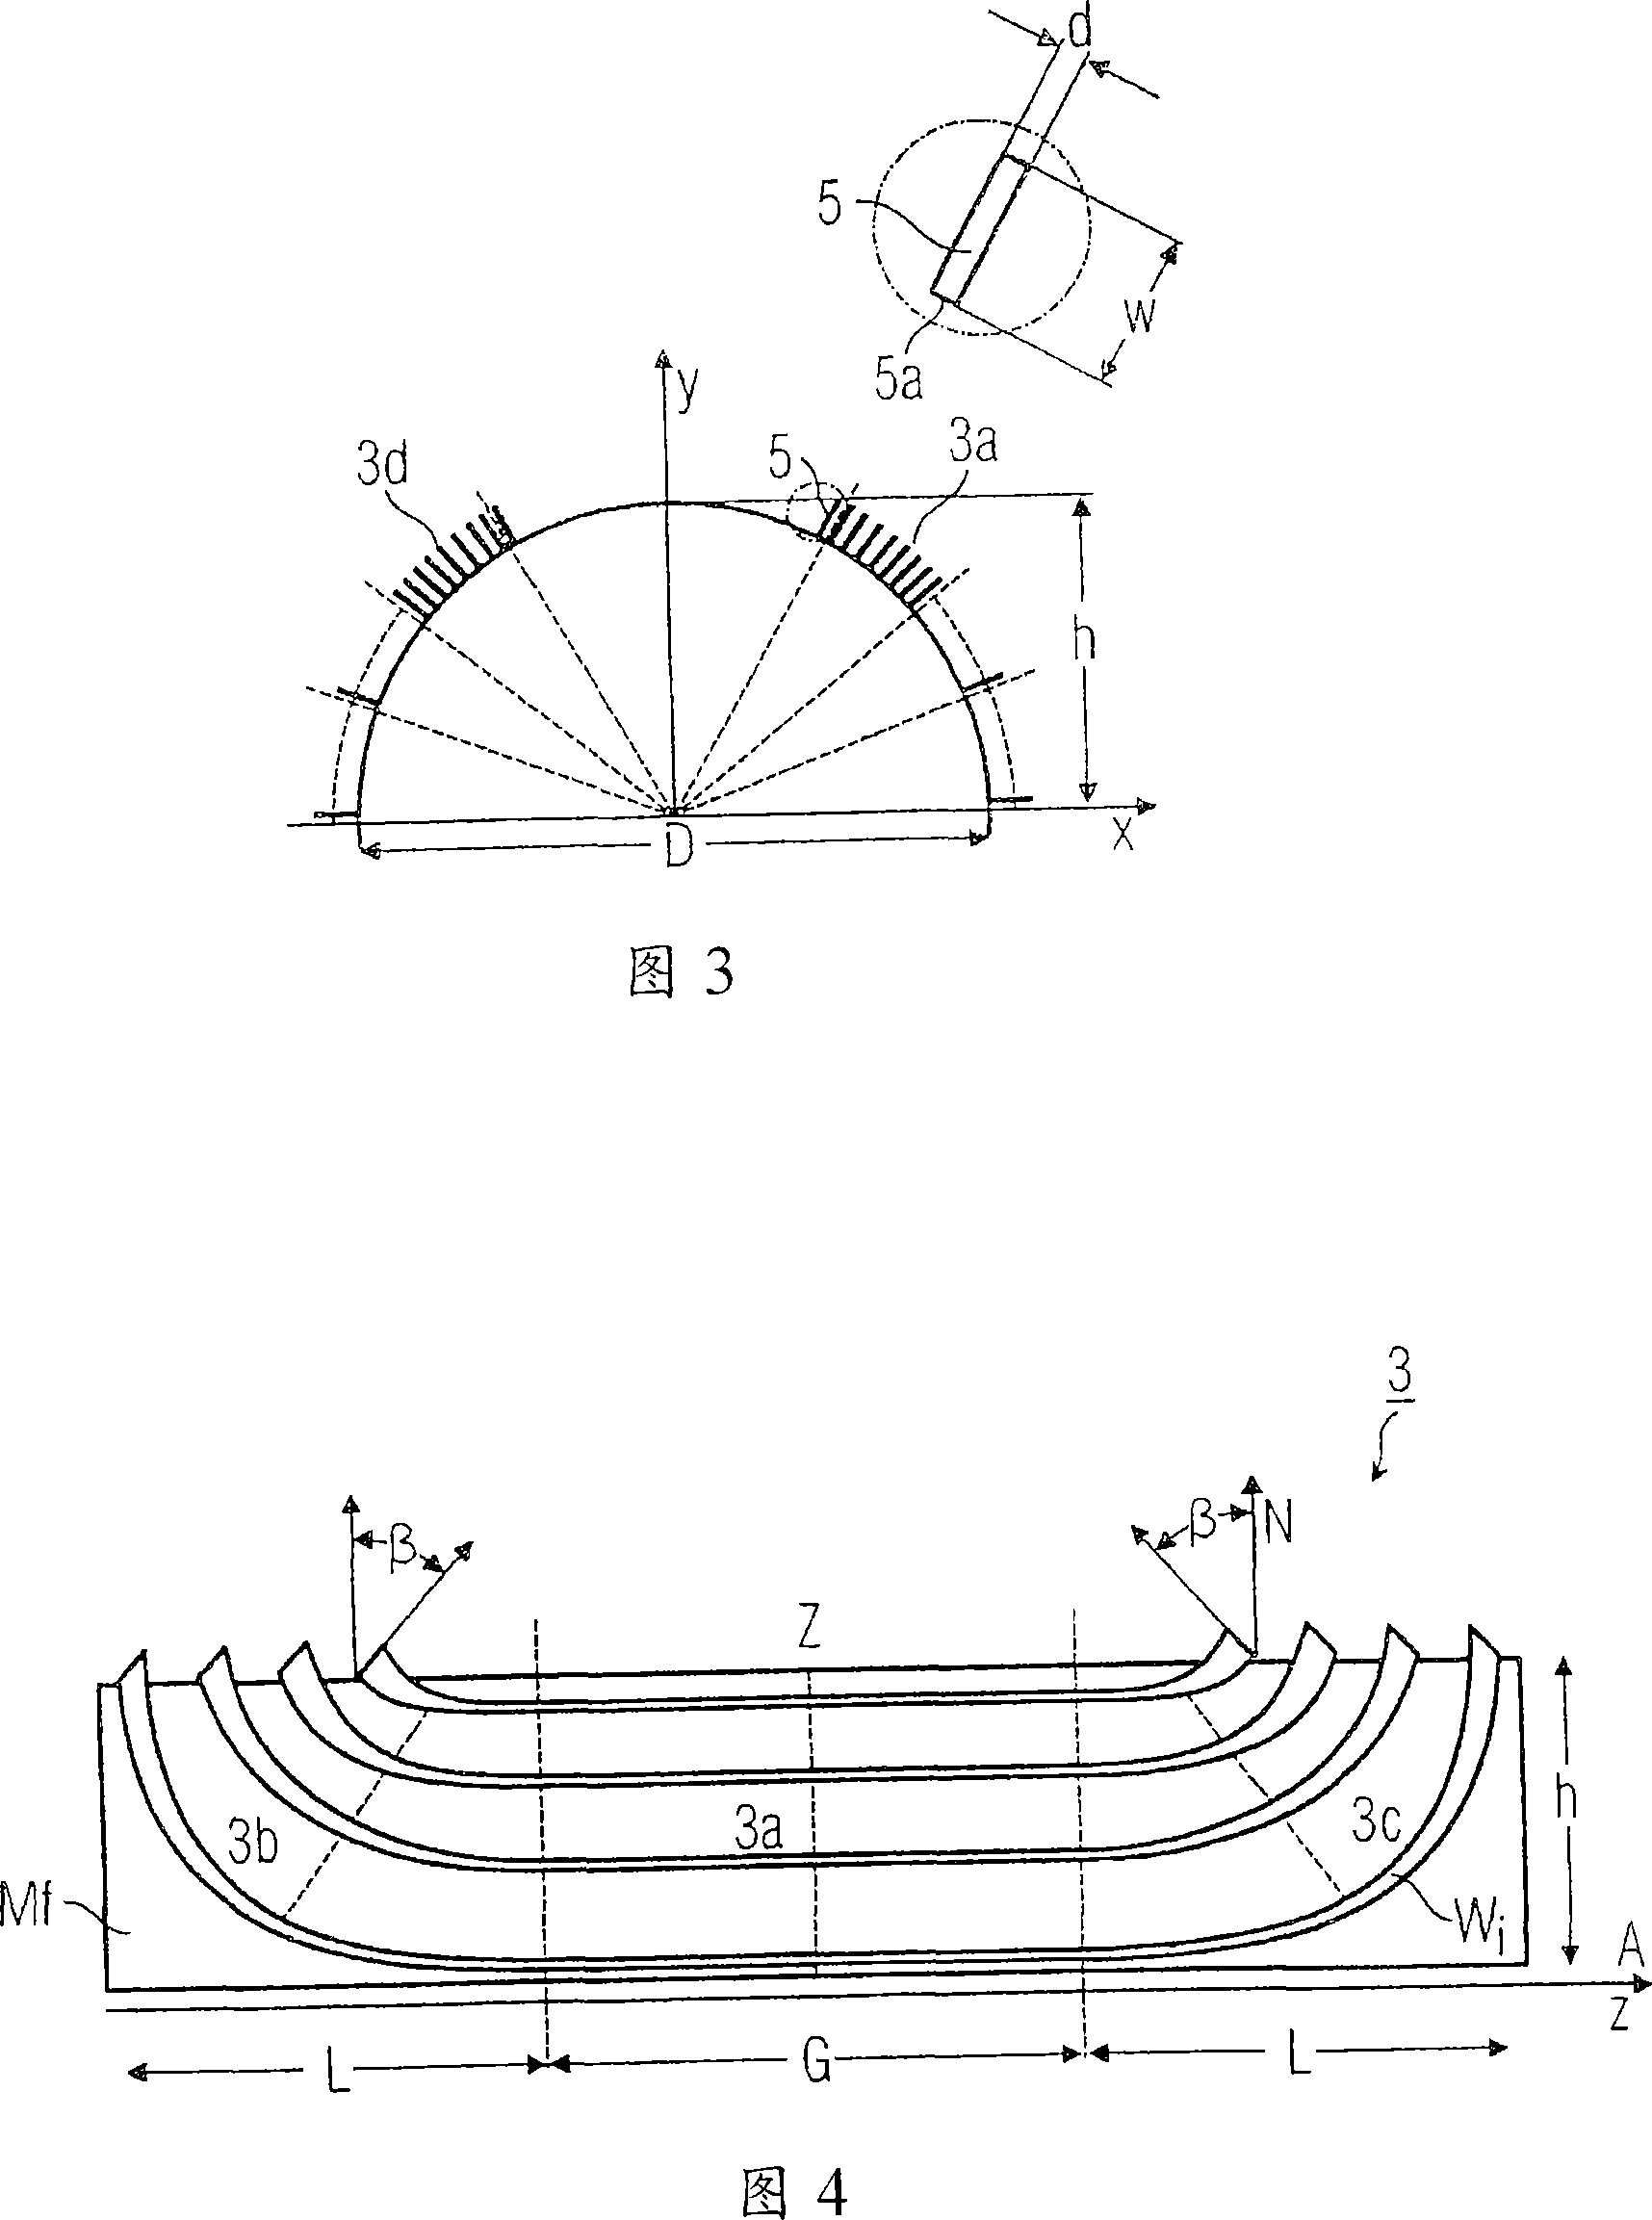 Saddle-shaped coil winding using superconductors, and method for the production thereof